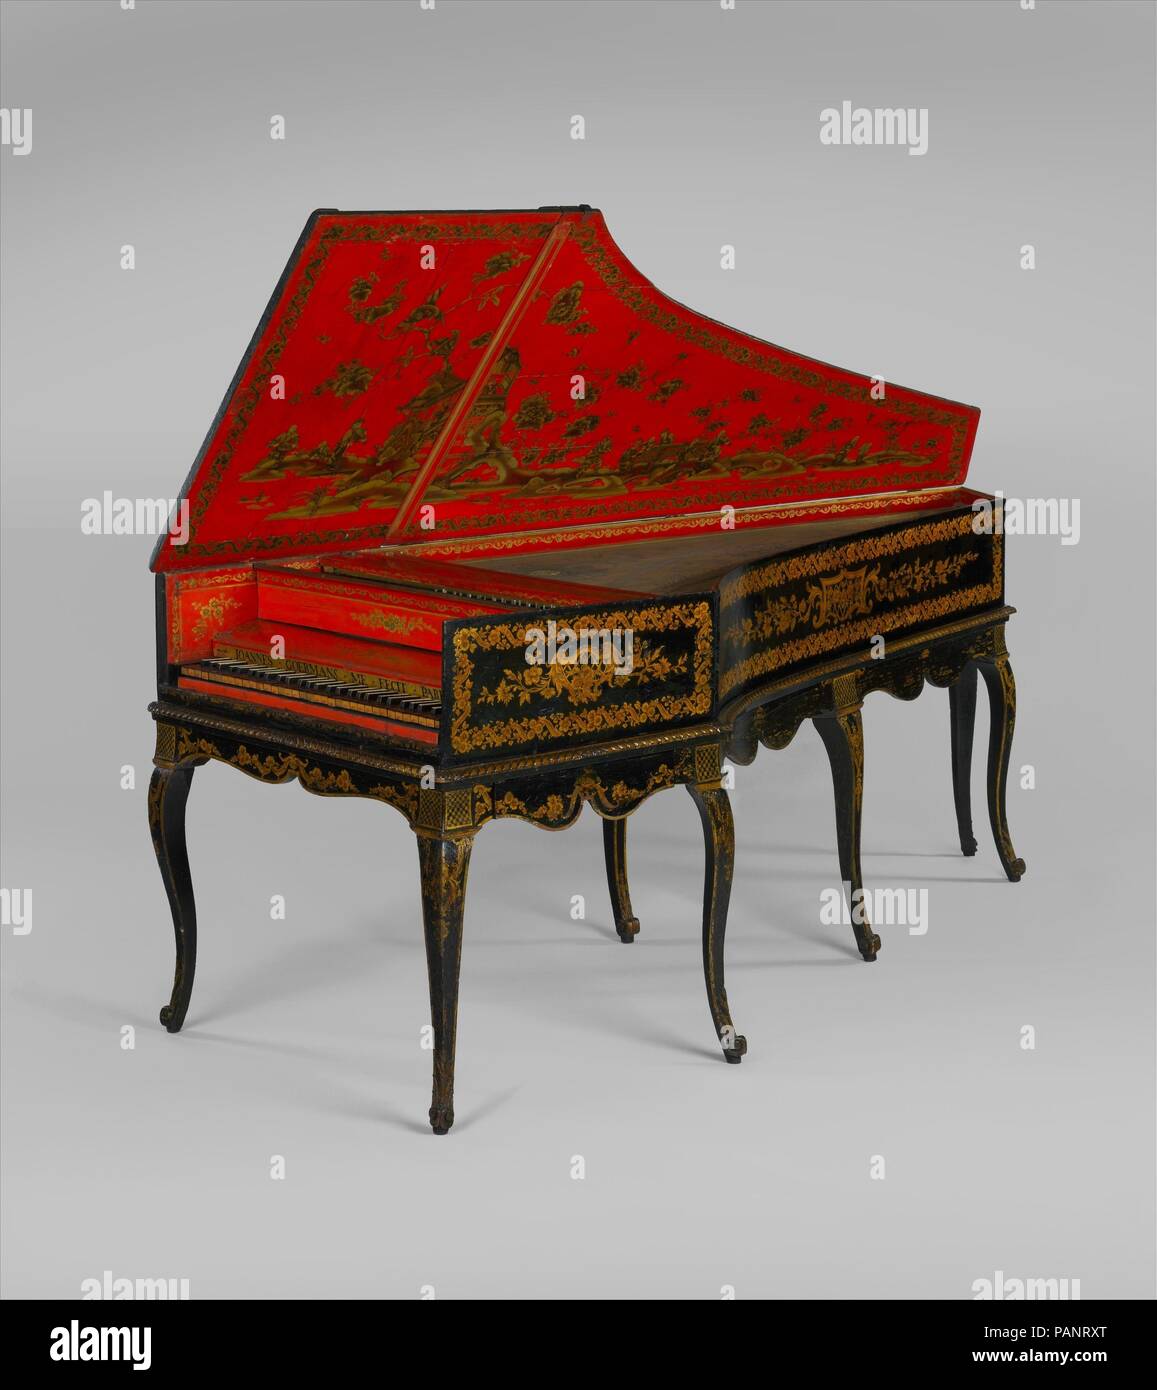 Harpsichord converted to a piano. Culture: French. Dimensions: Height (without lid): 36 7/8 in. (93.6 cm)  Width (parallel to keyboard): 36 3/4 in. (93.3 cm)  Depth (perpendicular to keyboard): 95 3/16 in. (241.7 cm). Maker: Jean Goermans (Dutch, active France, Gelden, The Netherlands 1703-1777 Paris). Date: 1754.  The harpsichord reached its greatest popularity and refinement in eighteenth century France. The French Revolution of 1789 and subsequent turmoil caused many of these beautiful instruments to be destroyed. This example is a rare survivor that was later converted to a piano in the la Stock Photo